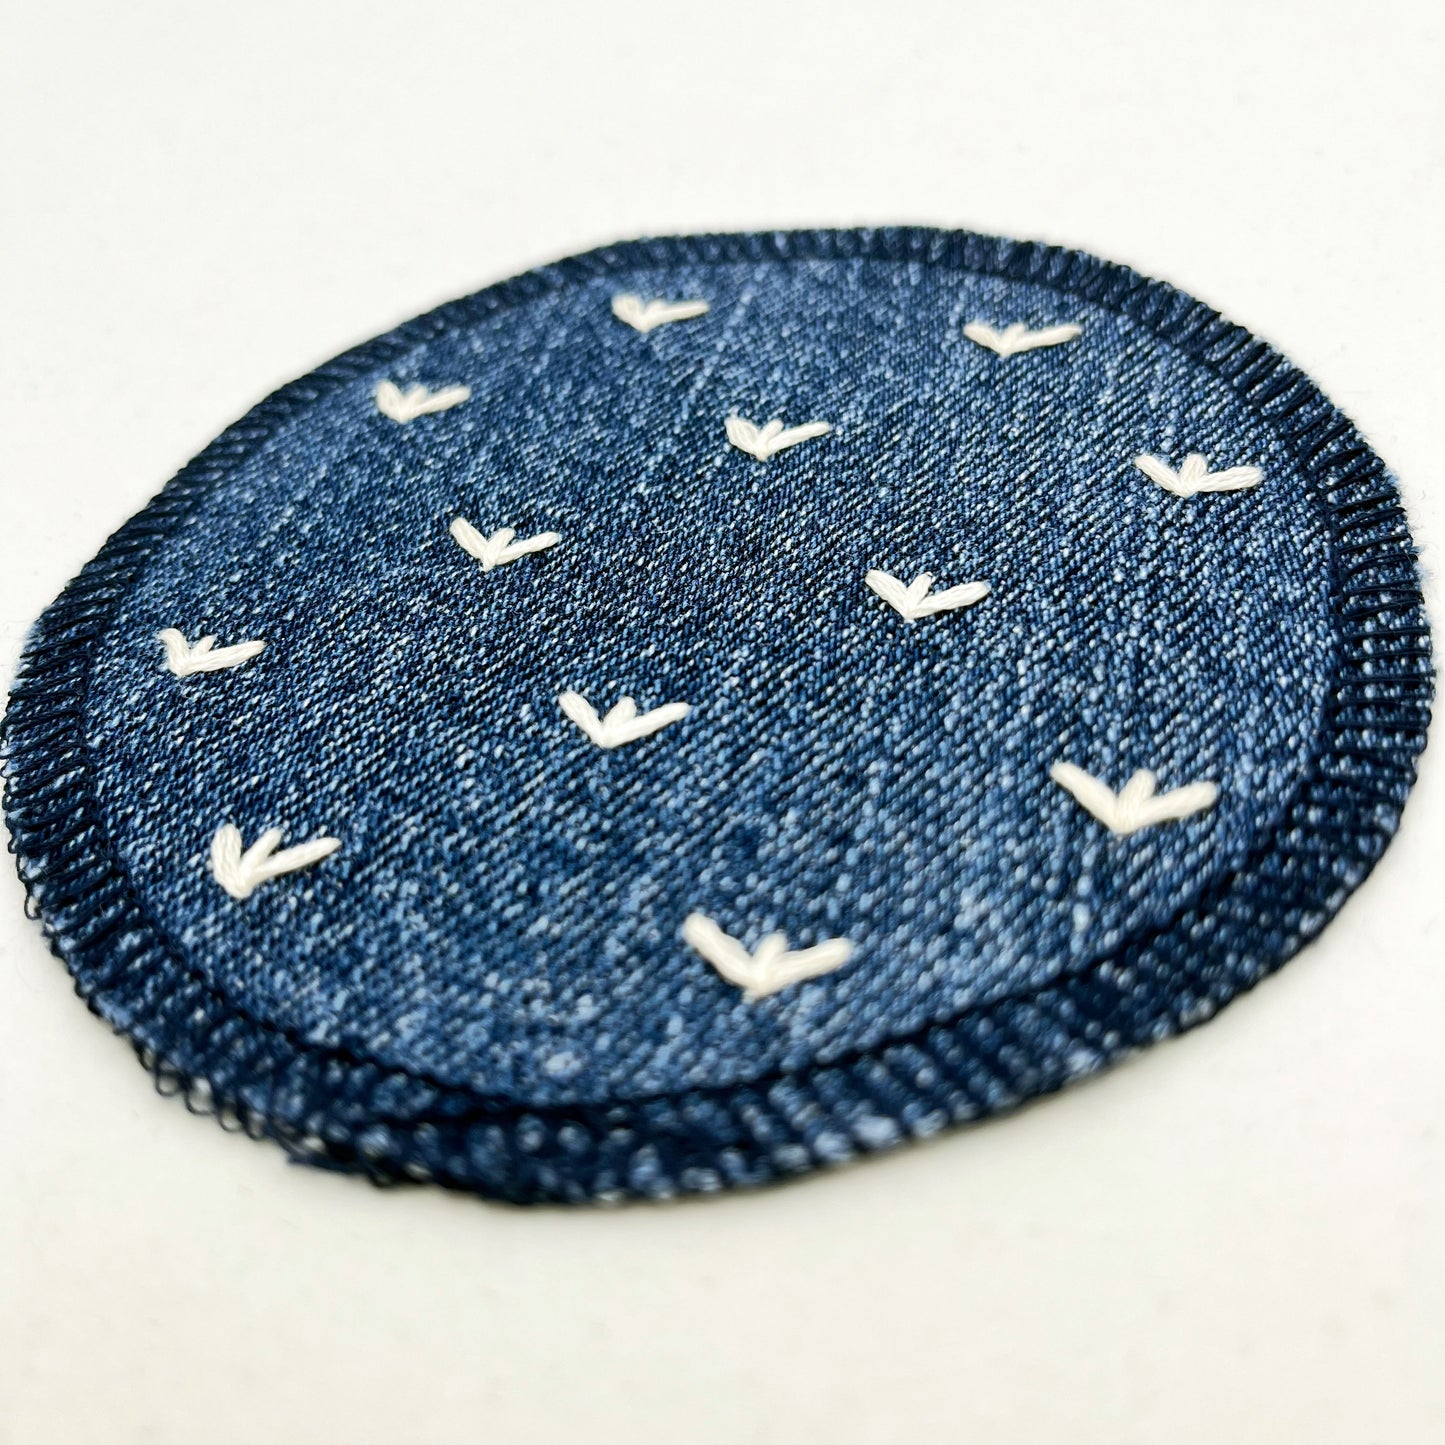 a close up angled view of a circle shaped patch made out of denim, with overlocked edges, with stitches in ivory that look like sprouts or birds feet, on a white background